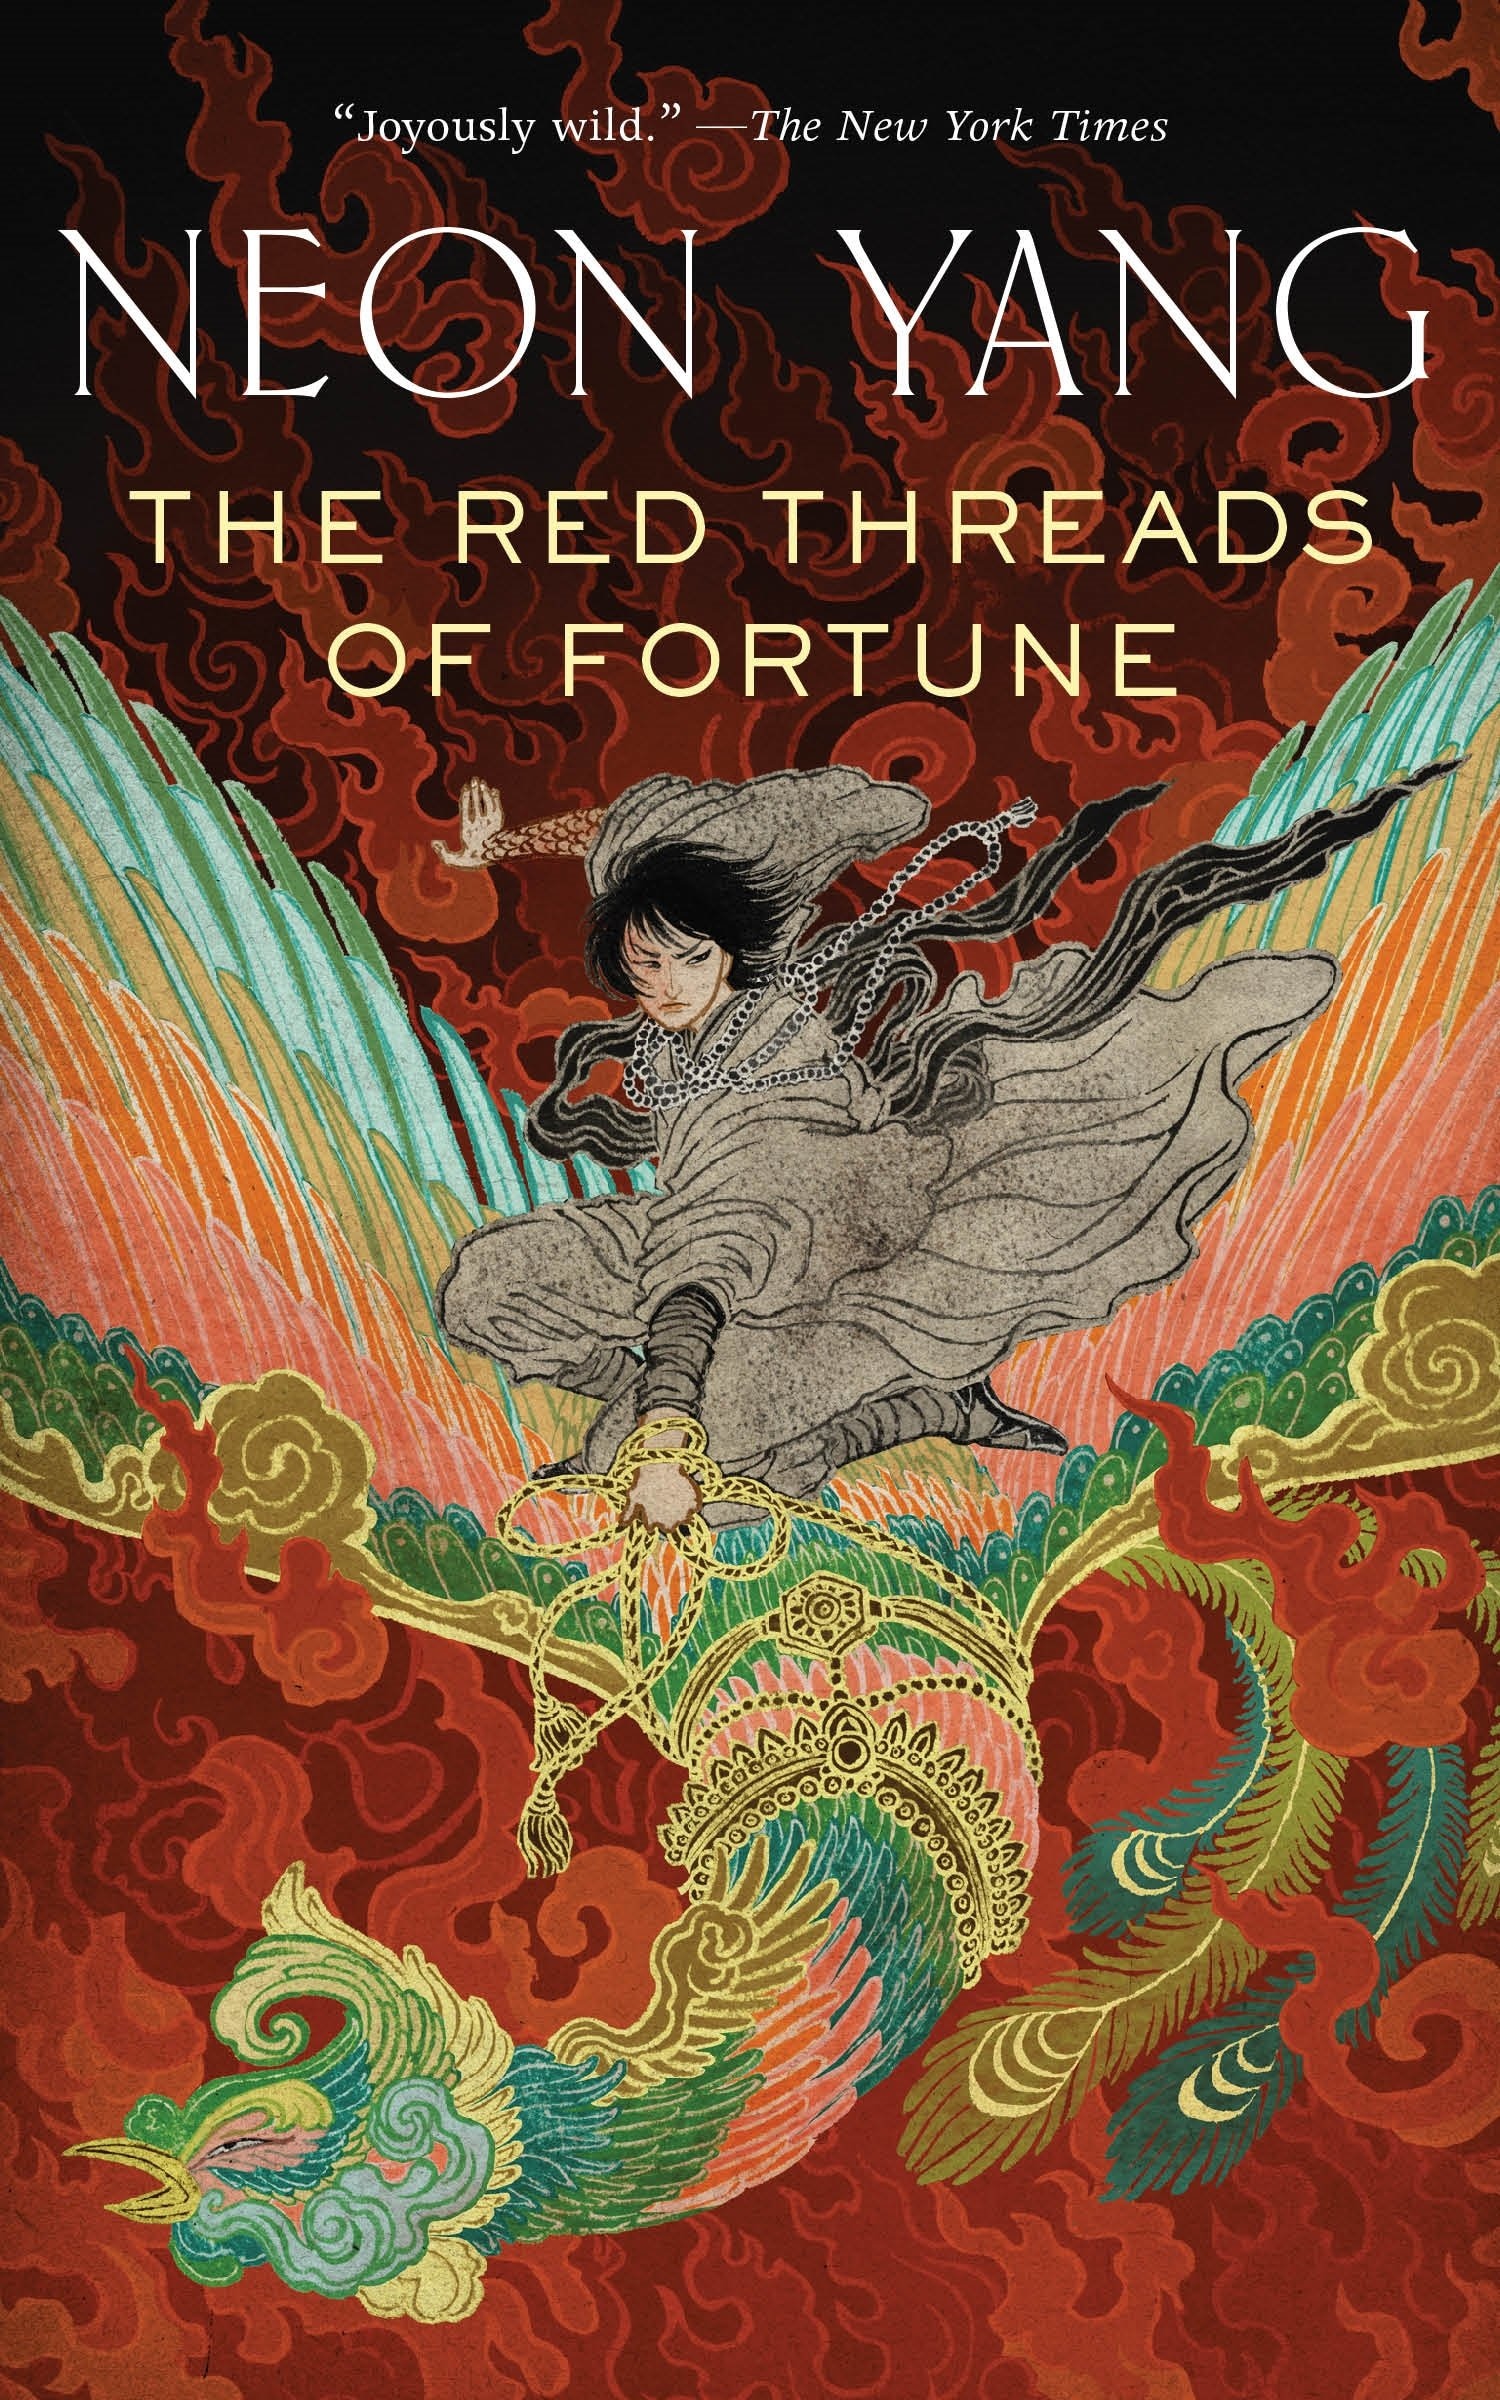 Book “The Red Threads of Fortune” by Neon Yang — September 26, 2017